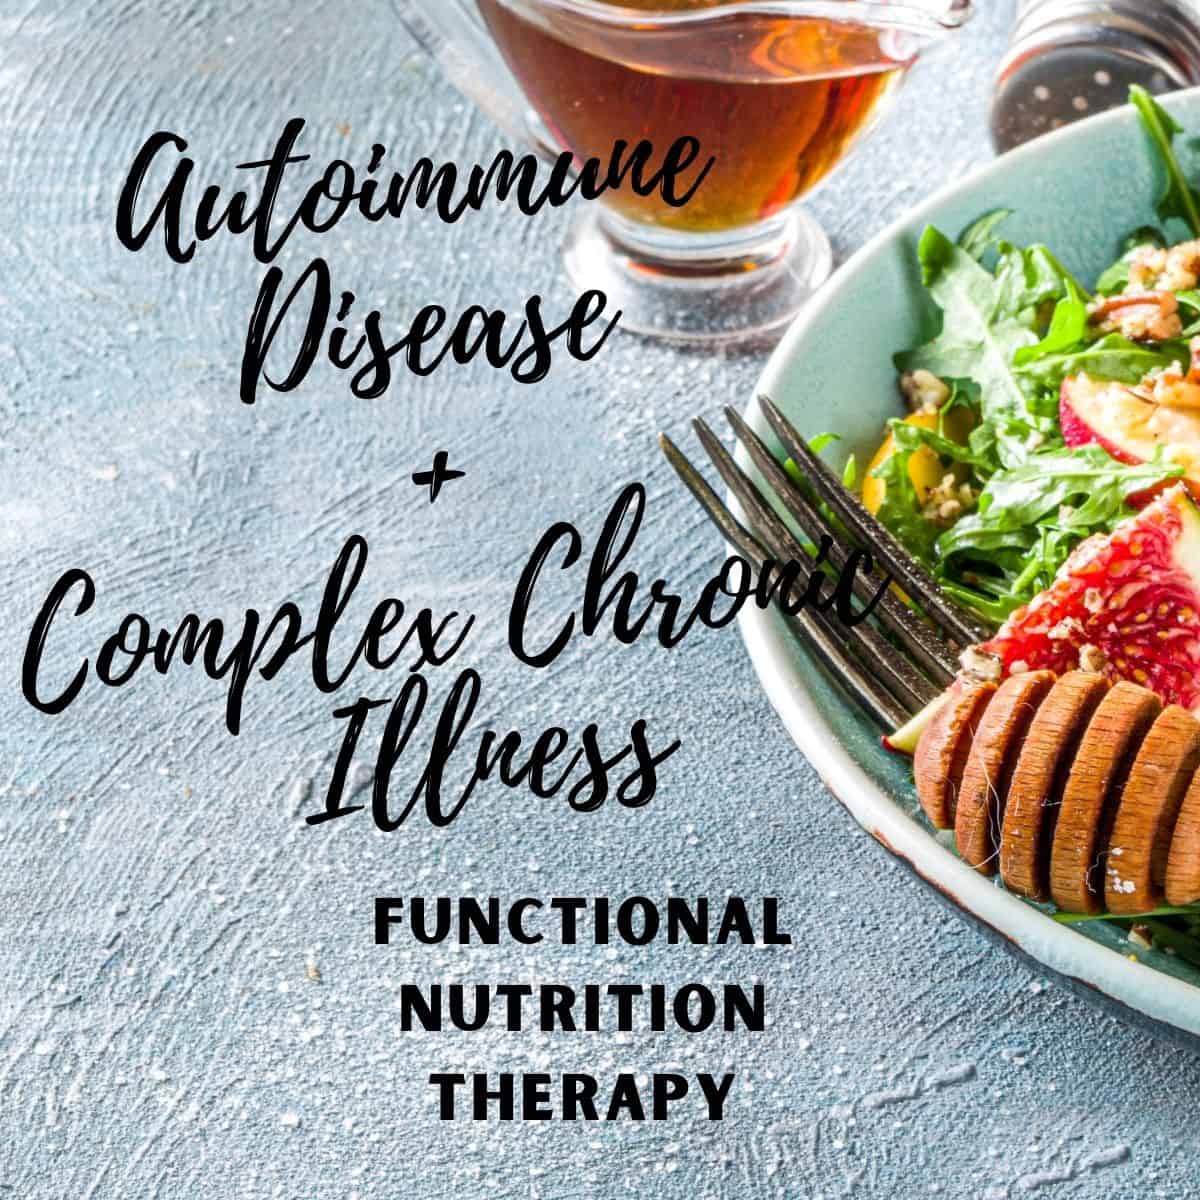 Functional Nutrition Therapy